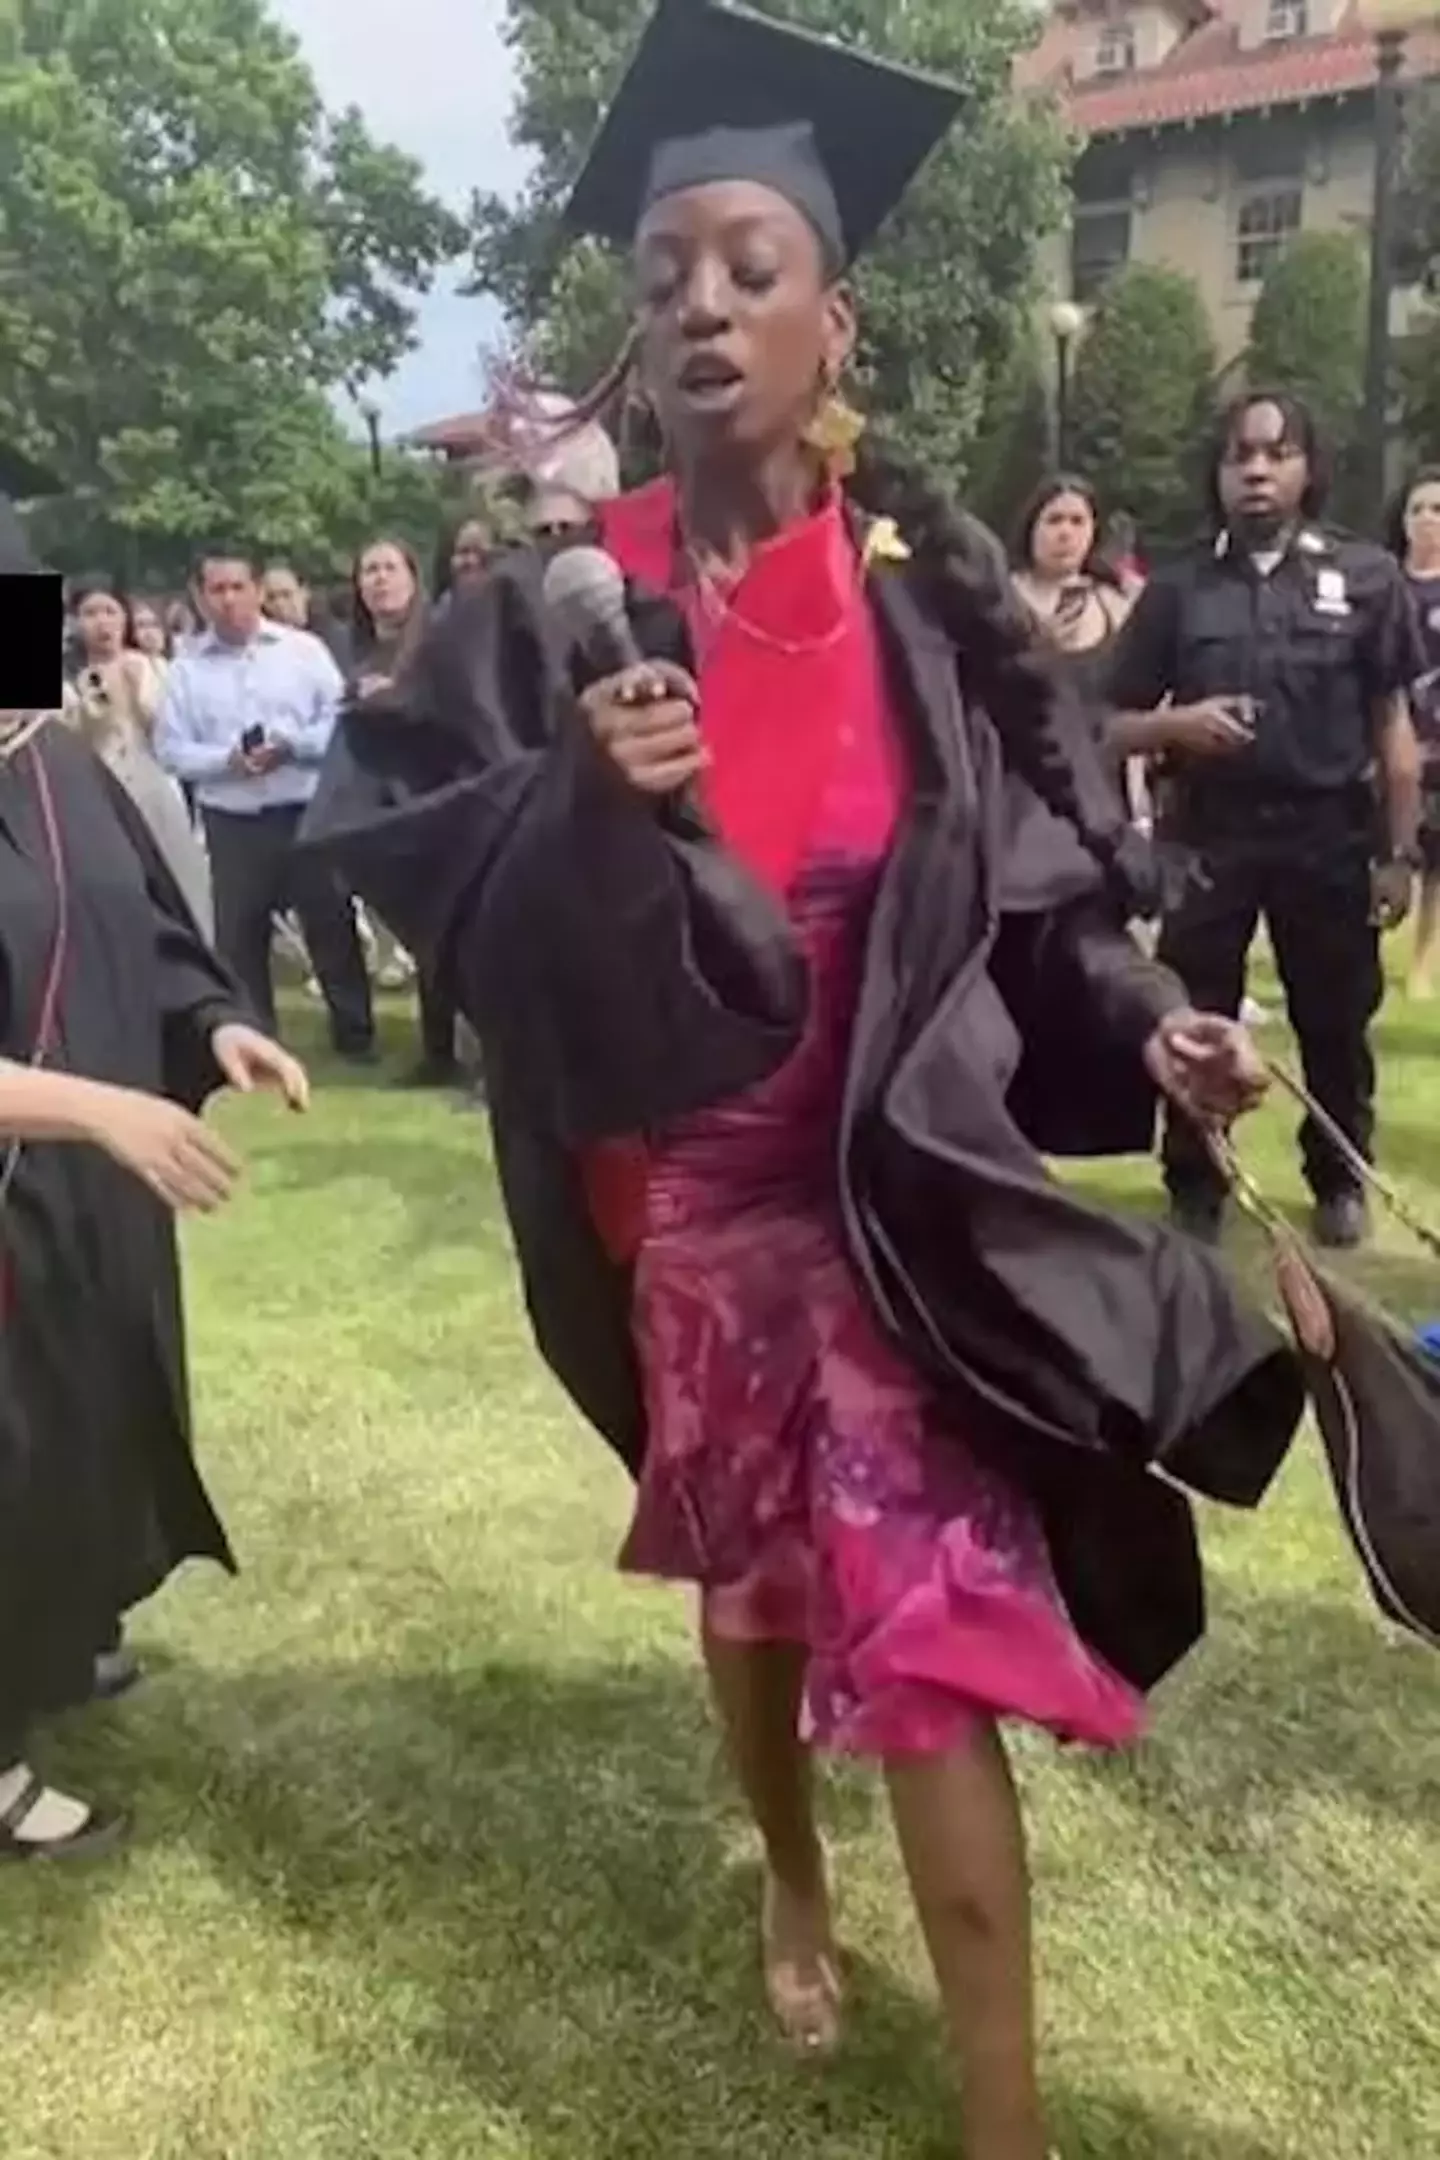 At her graduation she took the microphone and went viral for what she said.